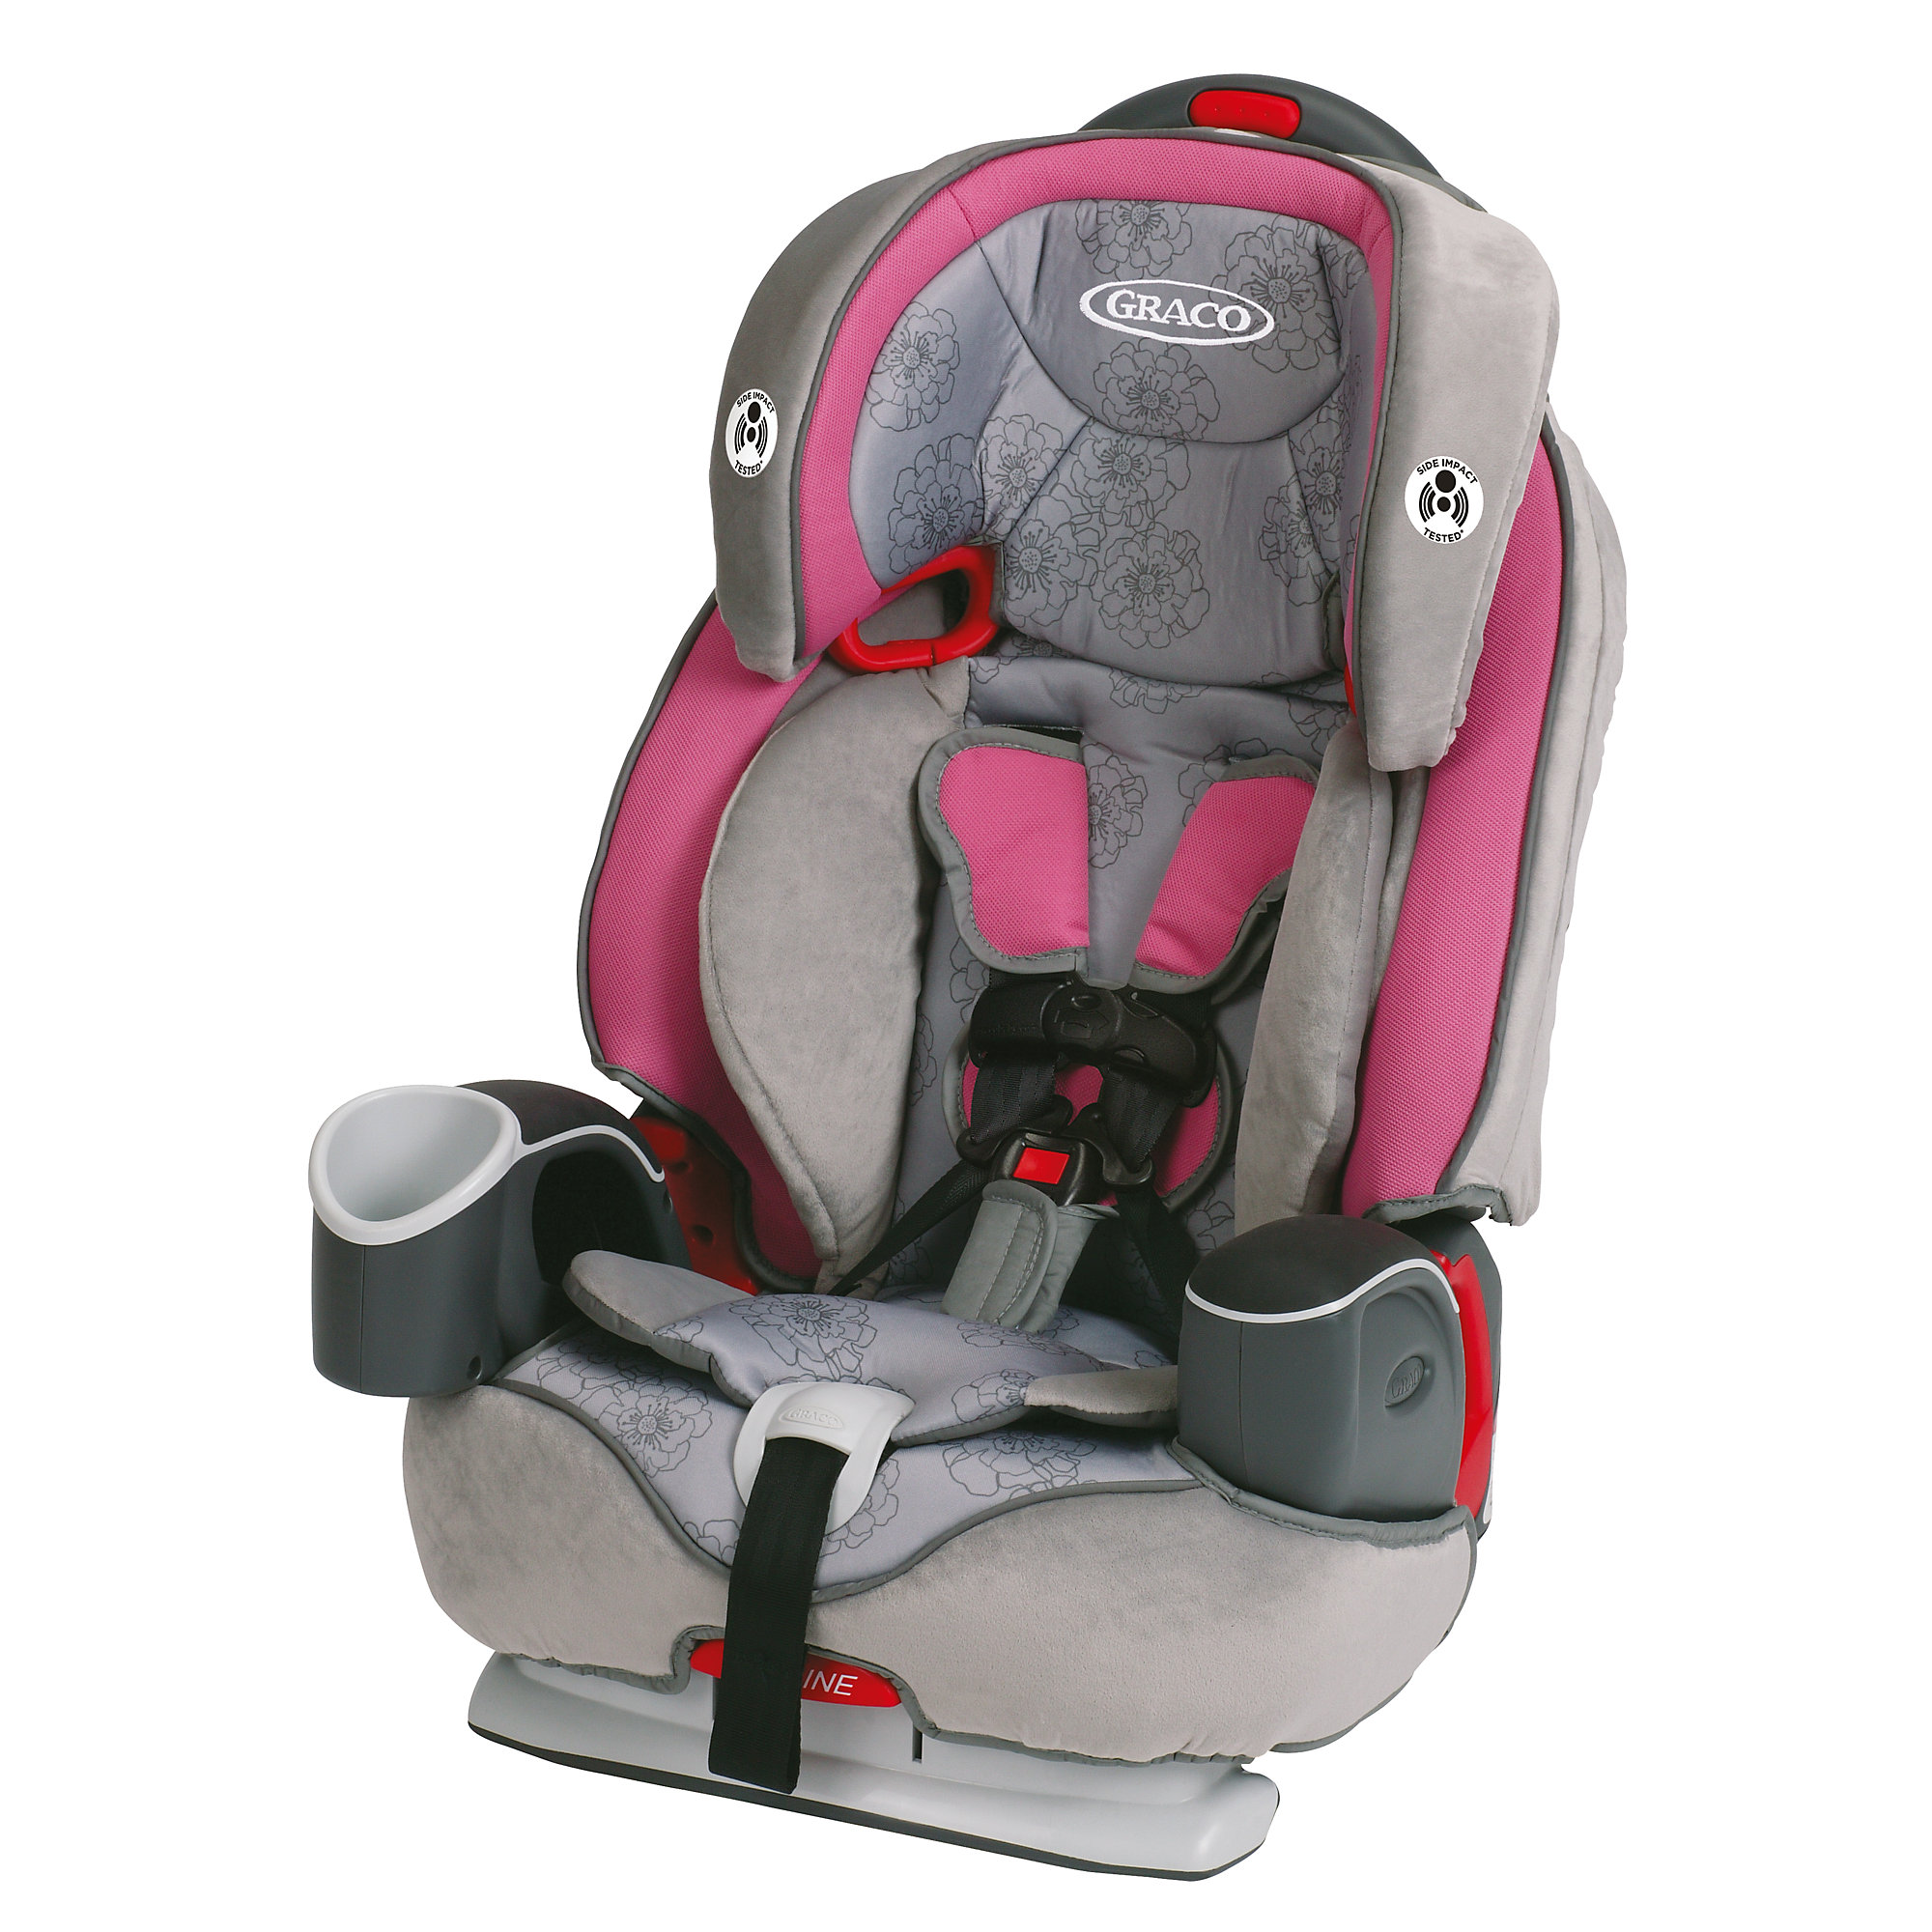 Graco Nautilus 3in1 Harness Booster